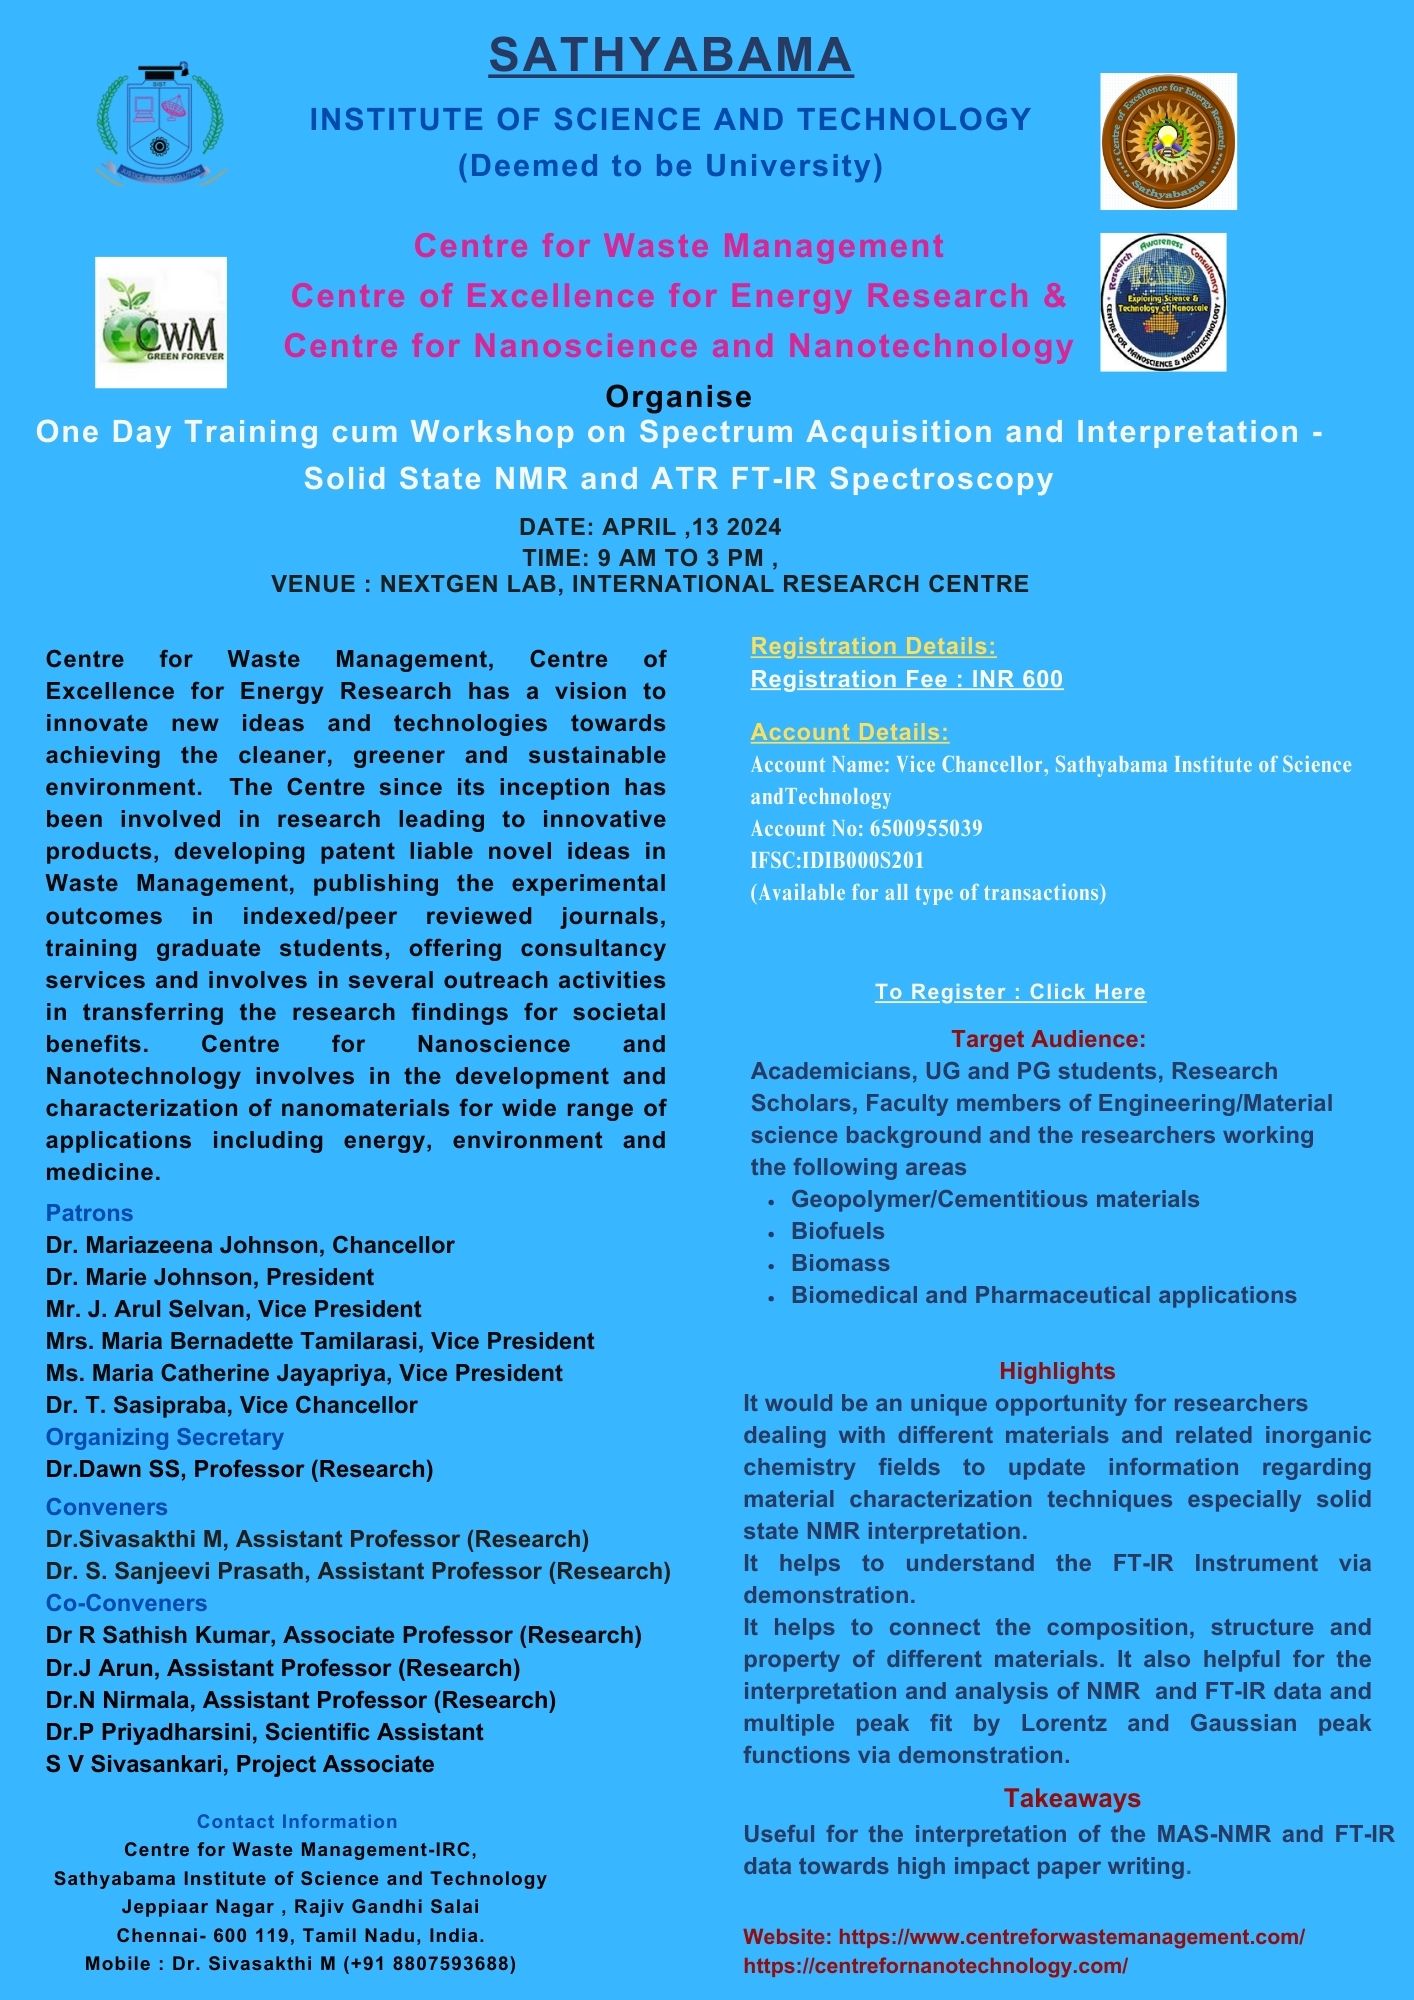 One Day Training cum Workshop on Spectrum Acquisition and Interpretation - Solid State NMR and ATR FT-IR Spectroscopy 2024